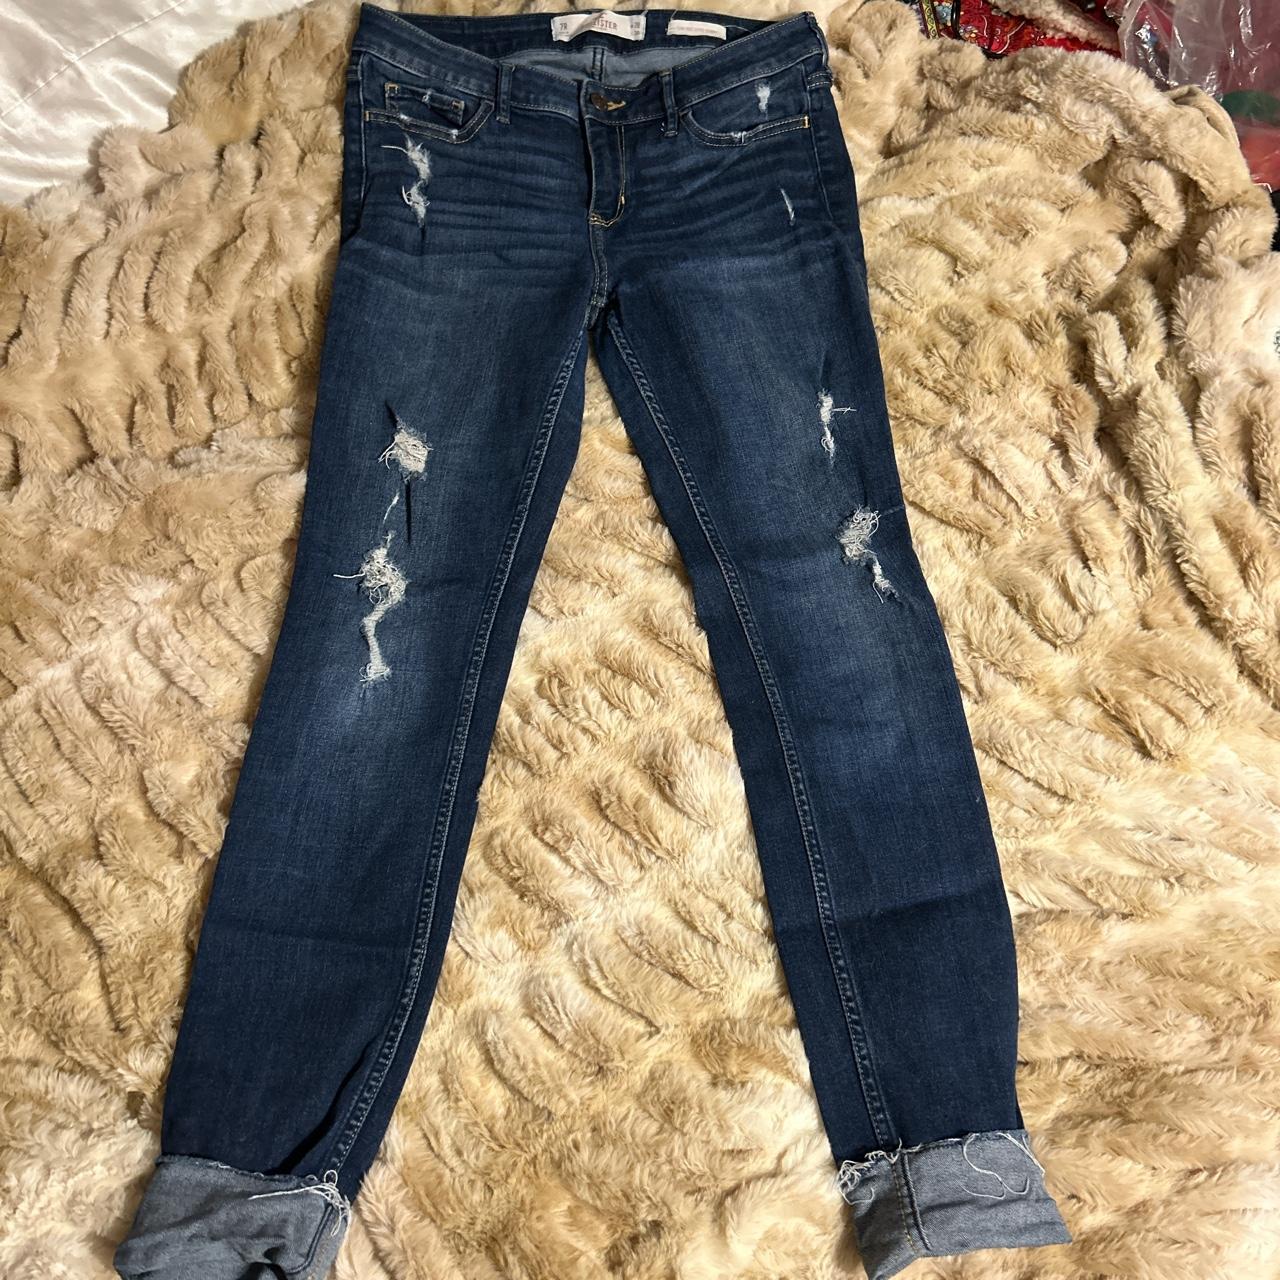 Low waisted Hollister ripped super skinny jeans! - Depop